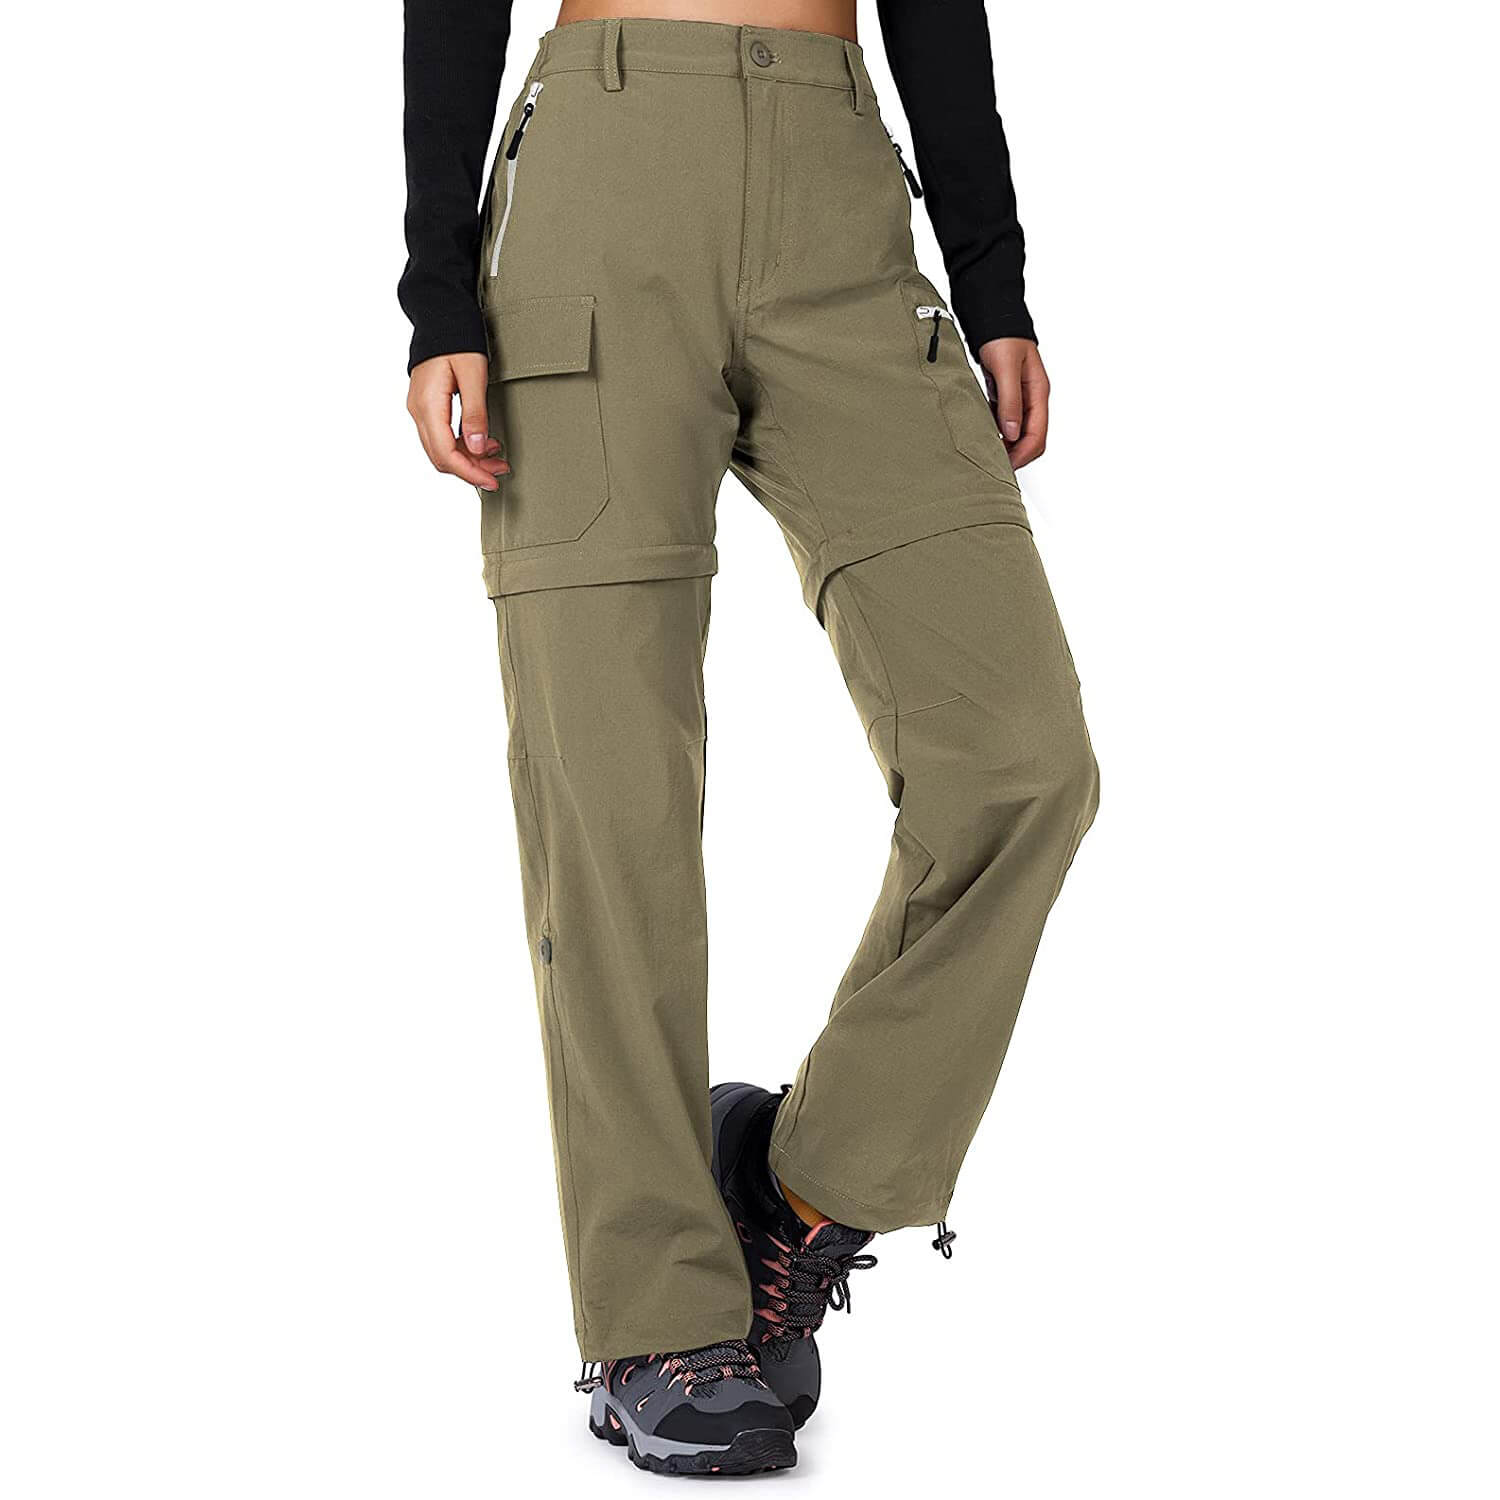 Prana Halle II Pant - Women's Review | Tested by GearLab